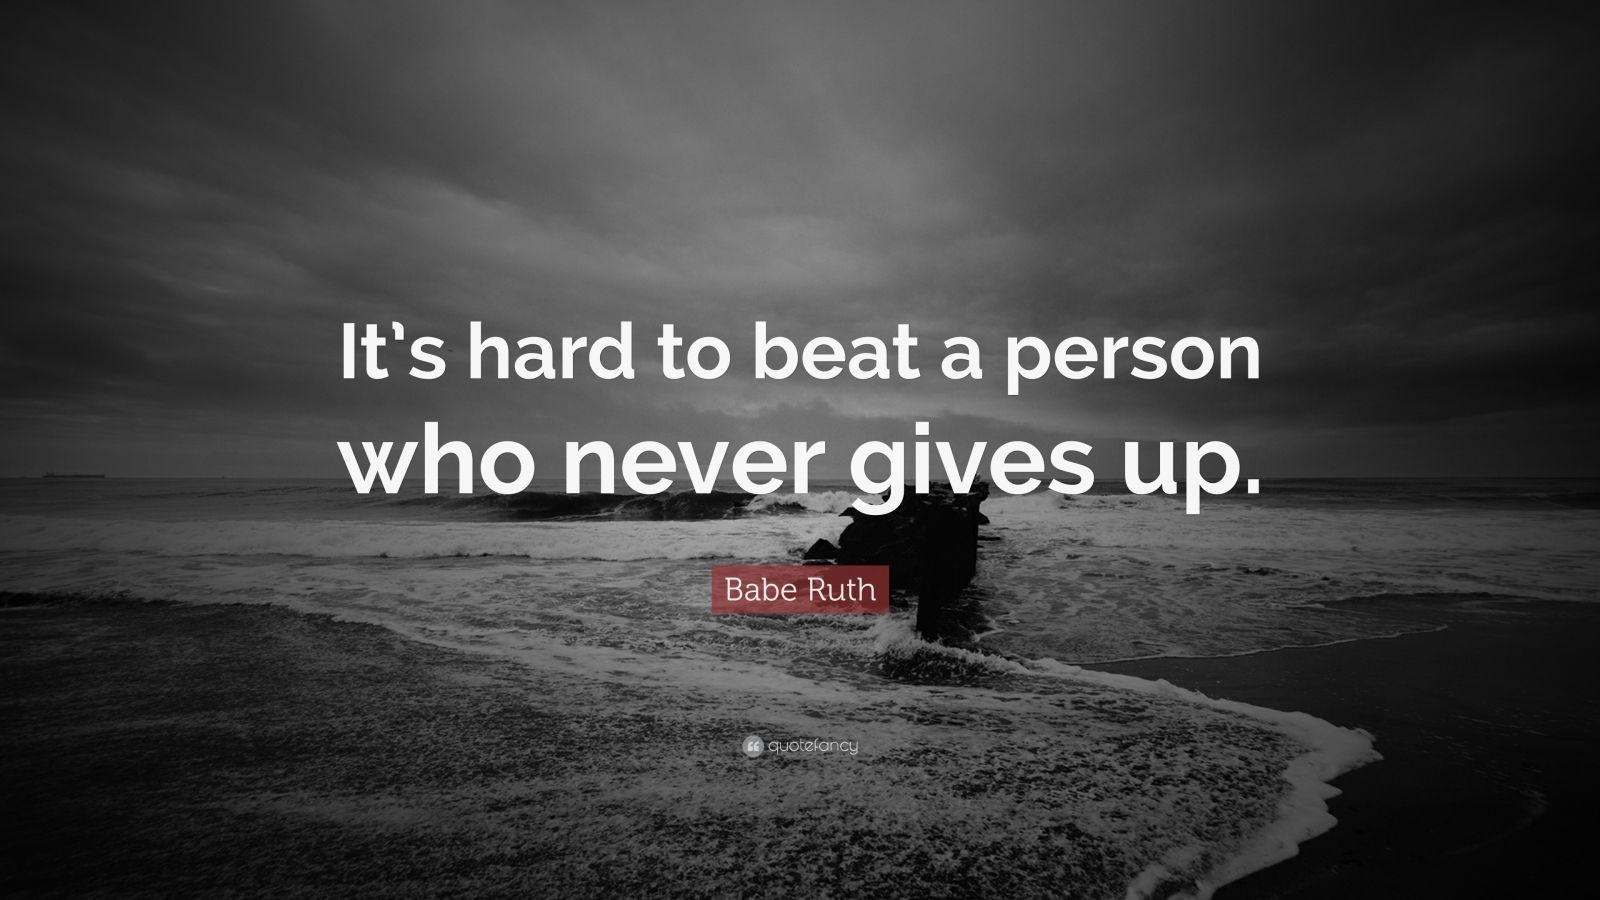 Babe Ruth Quote: “It’s hard to beat a person who never gives up.” (26